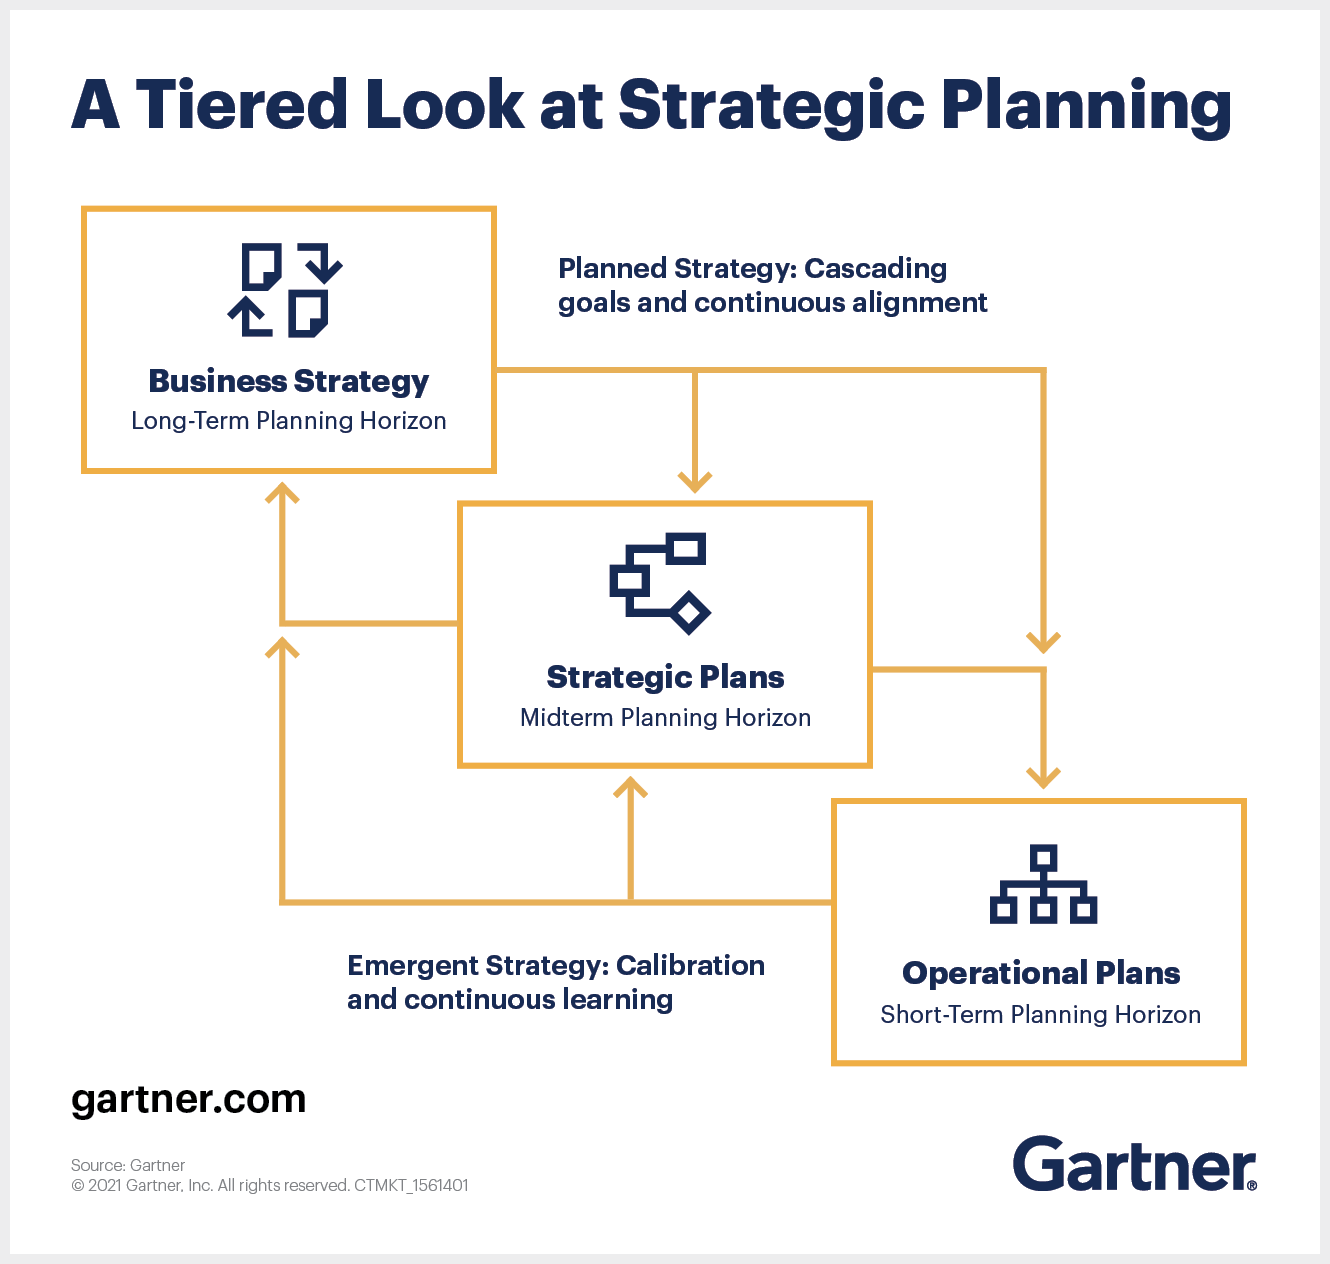 Gartner research suggests a template that government CIOs can leverage to develop an effective and actionable IT strategy.